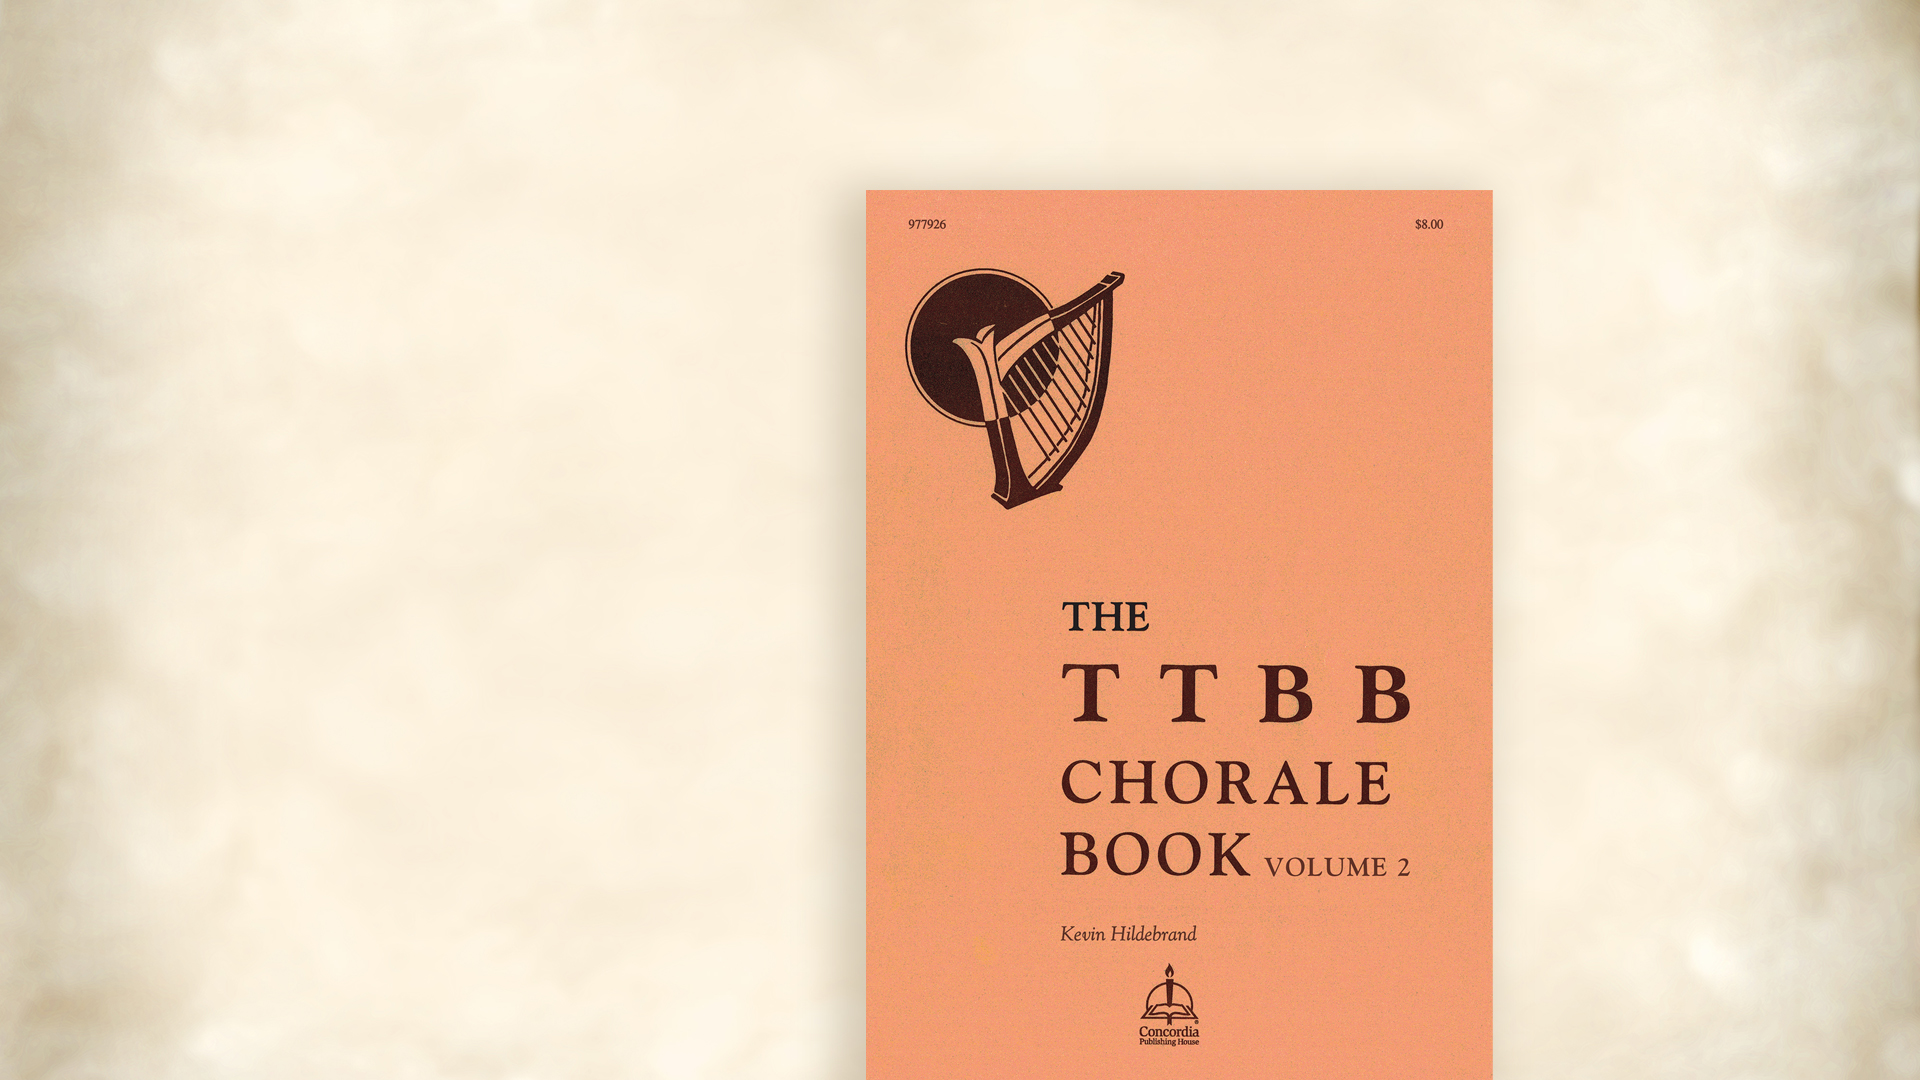 Music of the Month: The TTBB Chorale Book, Volume 2